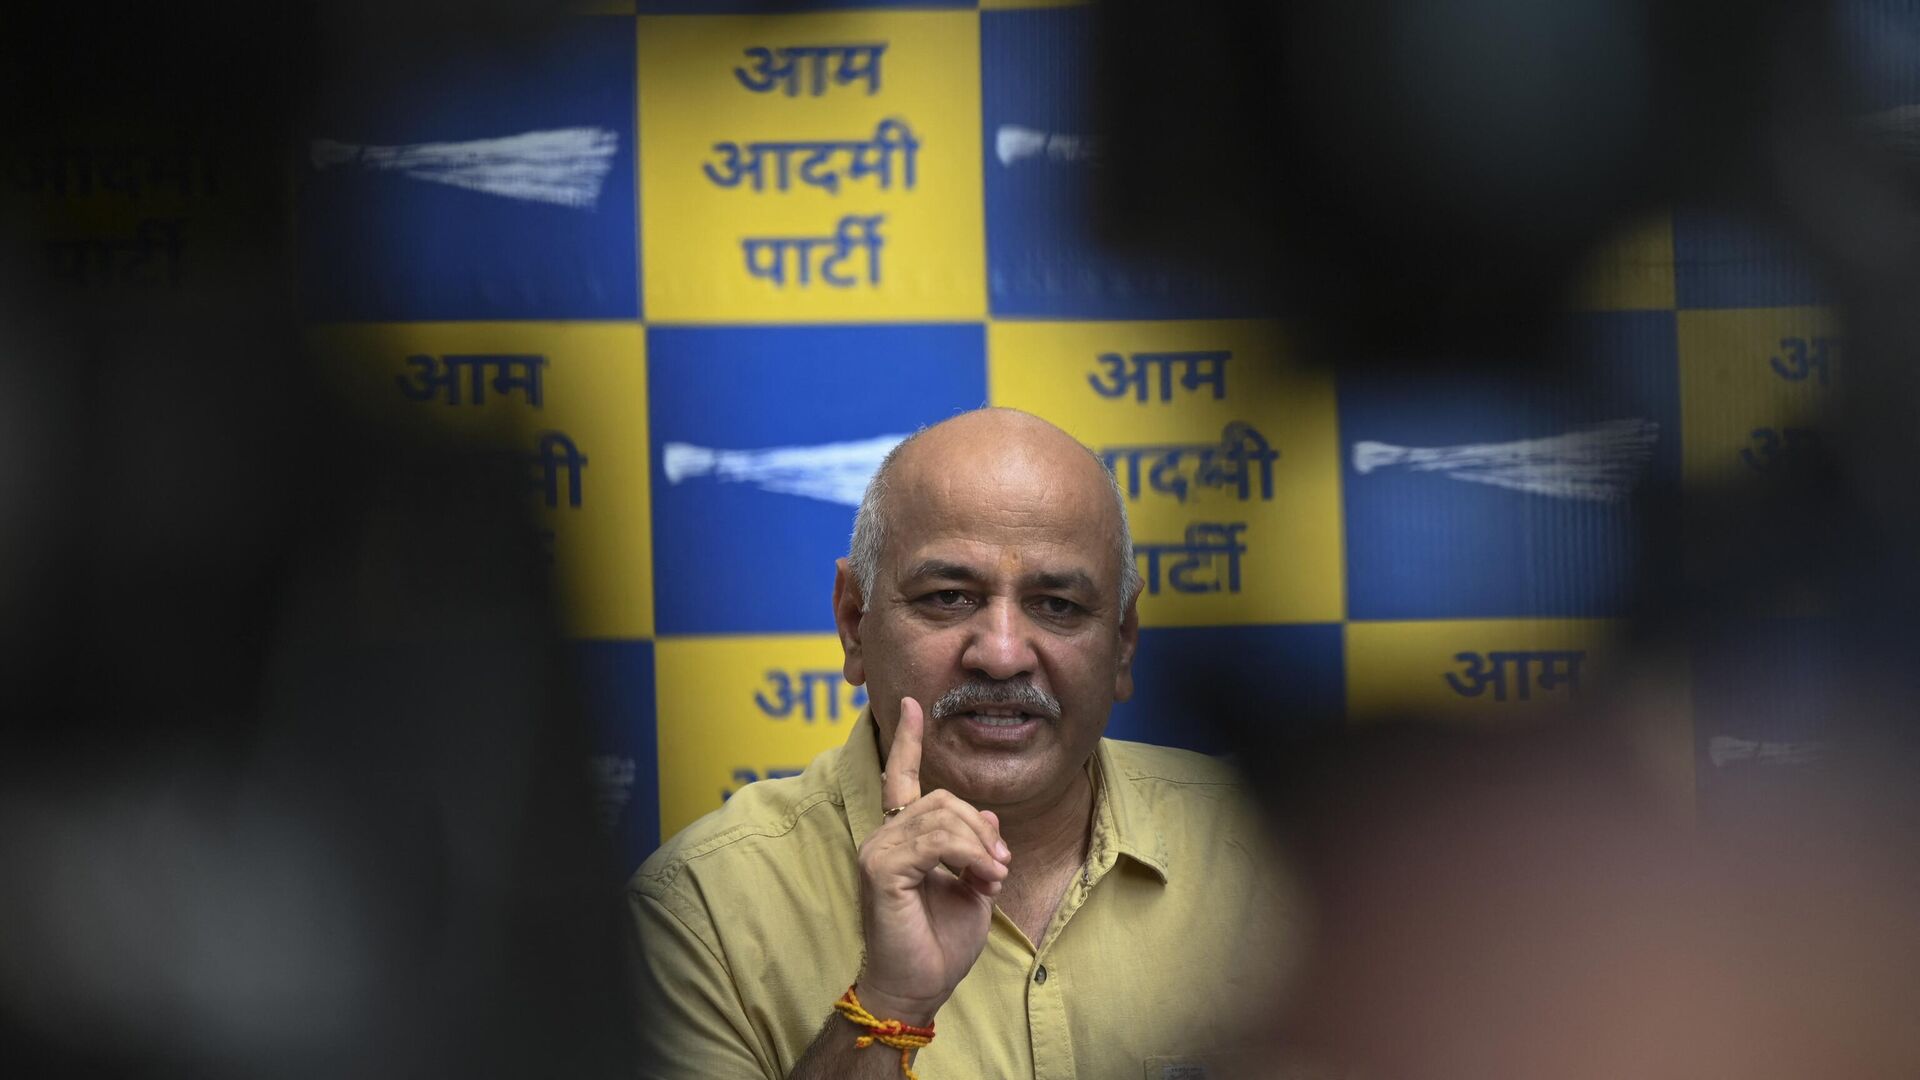 Delhi Deputy Chief Minister Manish Sisodia speaks during a press conference in New Delhi on August 20, 2022, after the Central Bureau of Investigation (CBI) had raided his home in relation to alleged irregularities with the implementation of the Excise Policy 2021-22. - Sputnik India, 1920, 22.02.2023